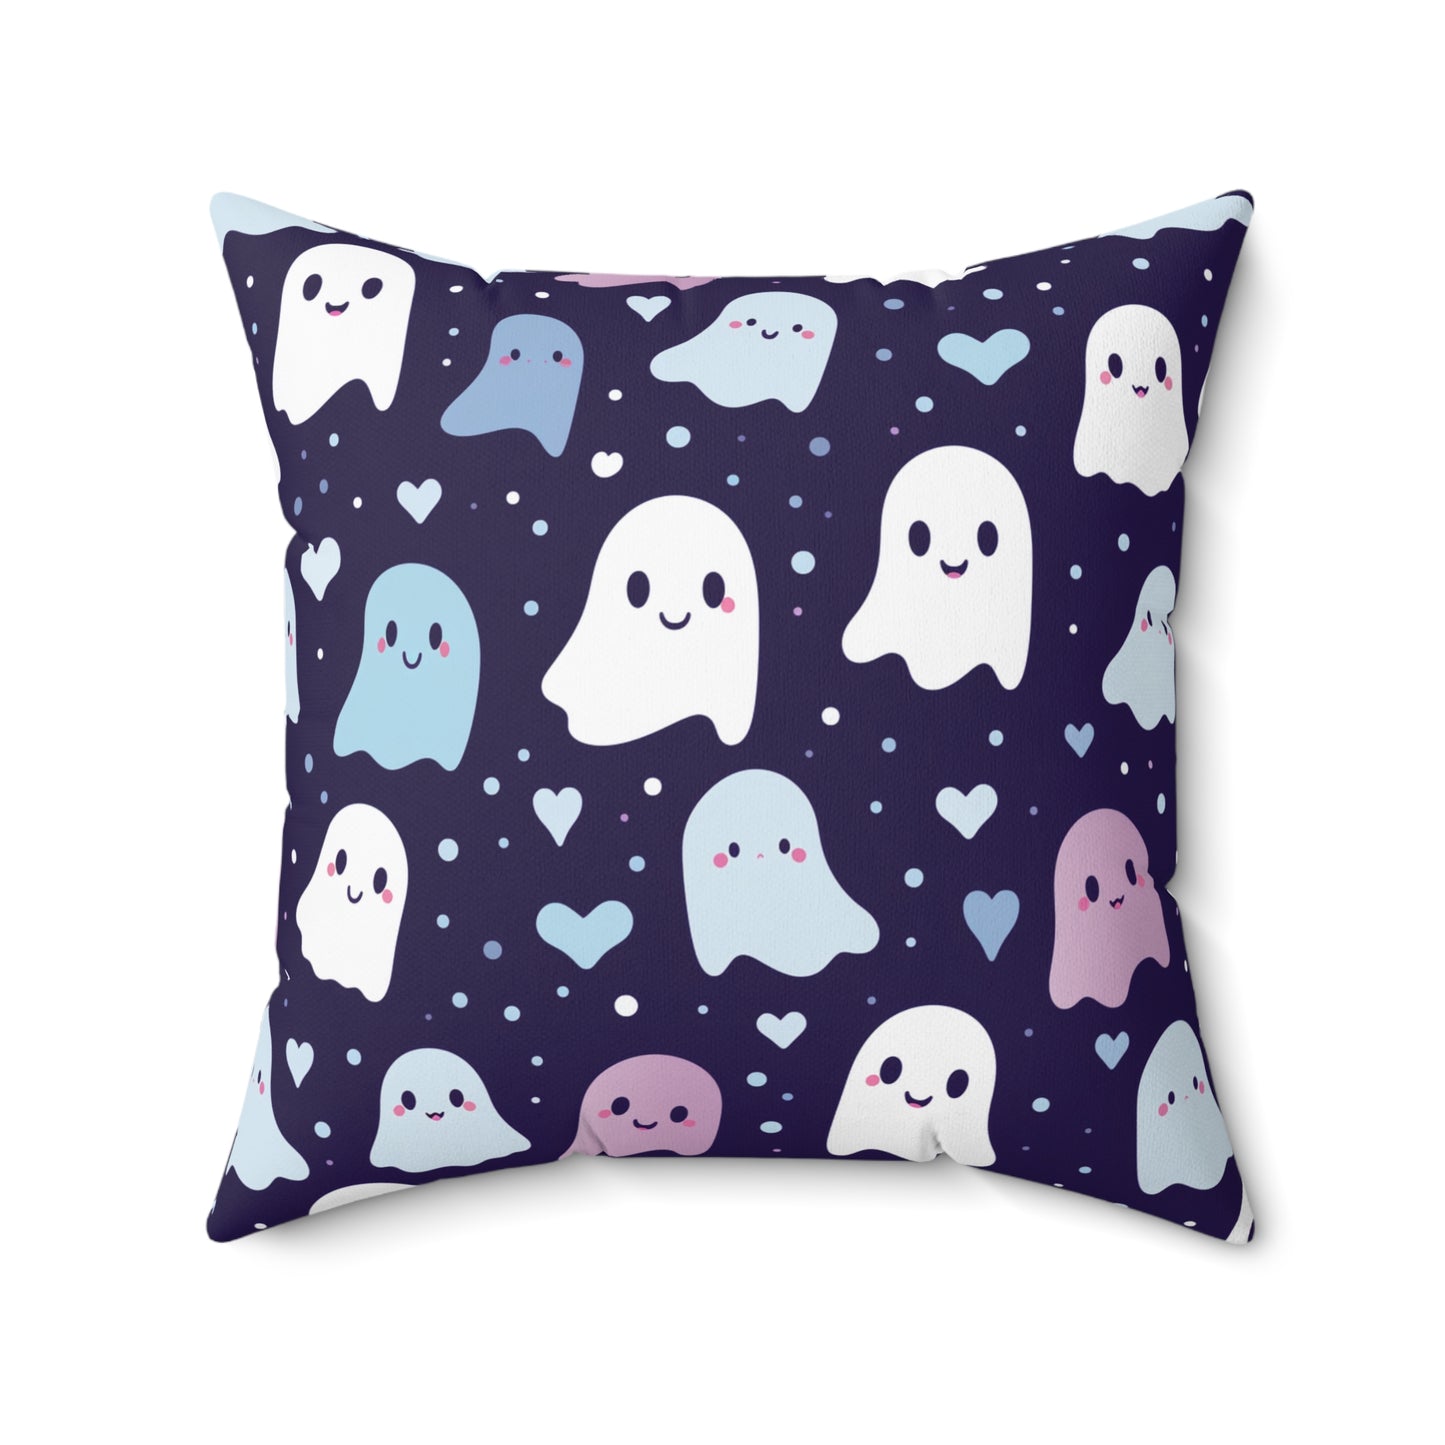 Cute Ghosts Accent Throw Pillow